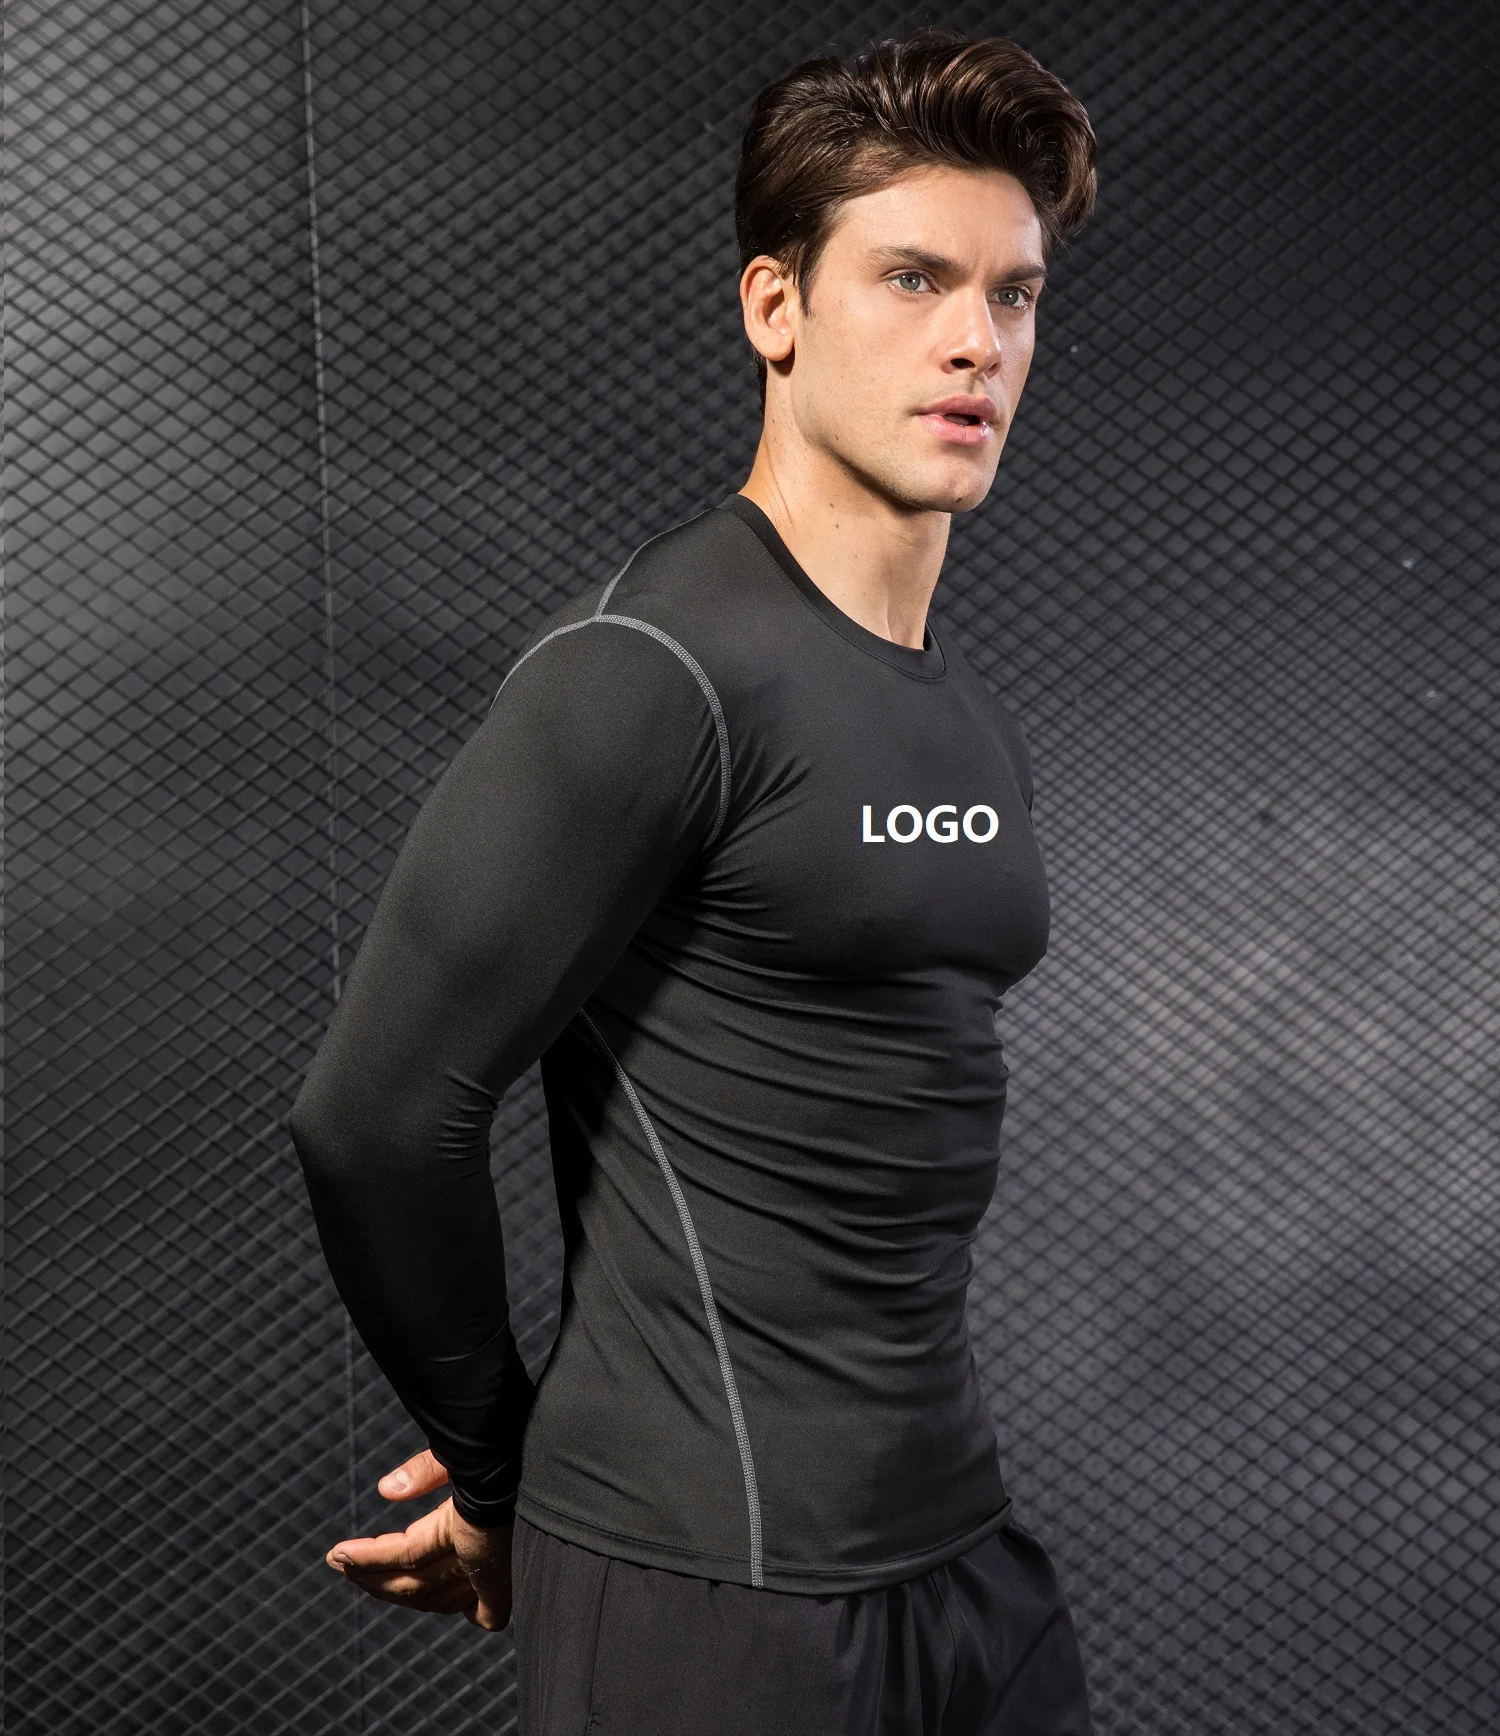 

Vedo Compression Shirt Dropshipping Custom Logo Polyester Slim Fit Long Sleeve Fitness Clothing Base Layer Men Top GYM Shirt, Picture shows